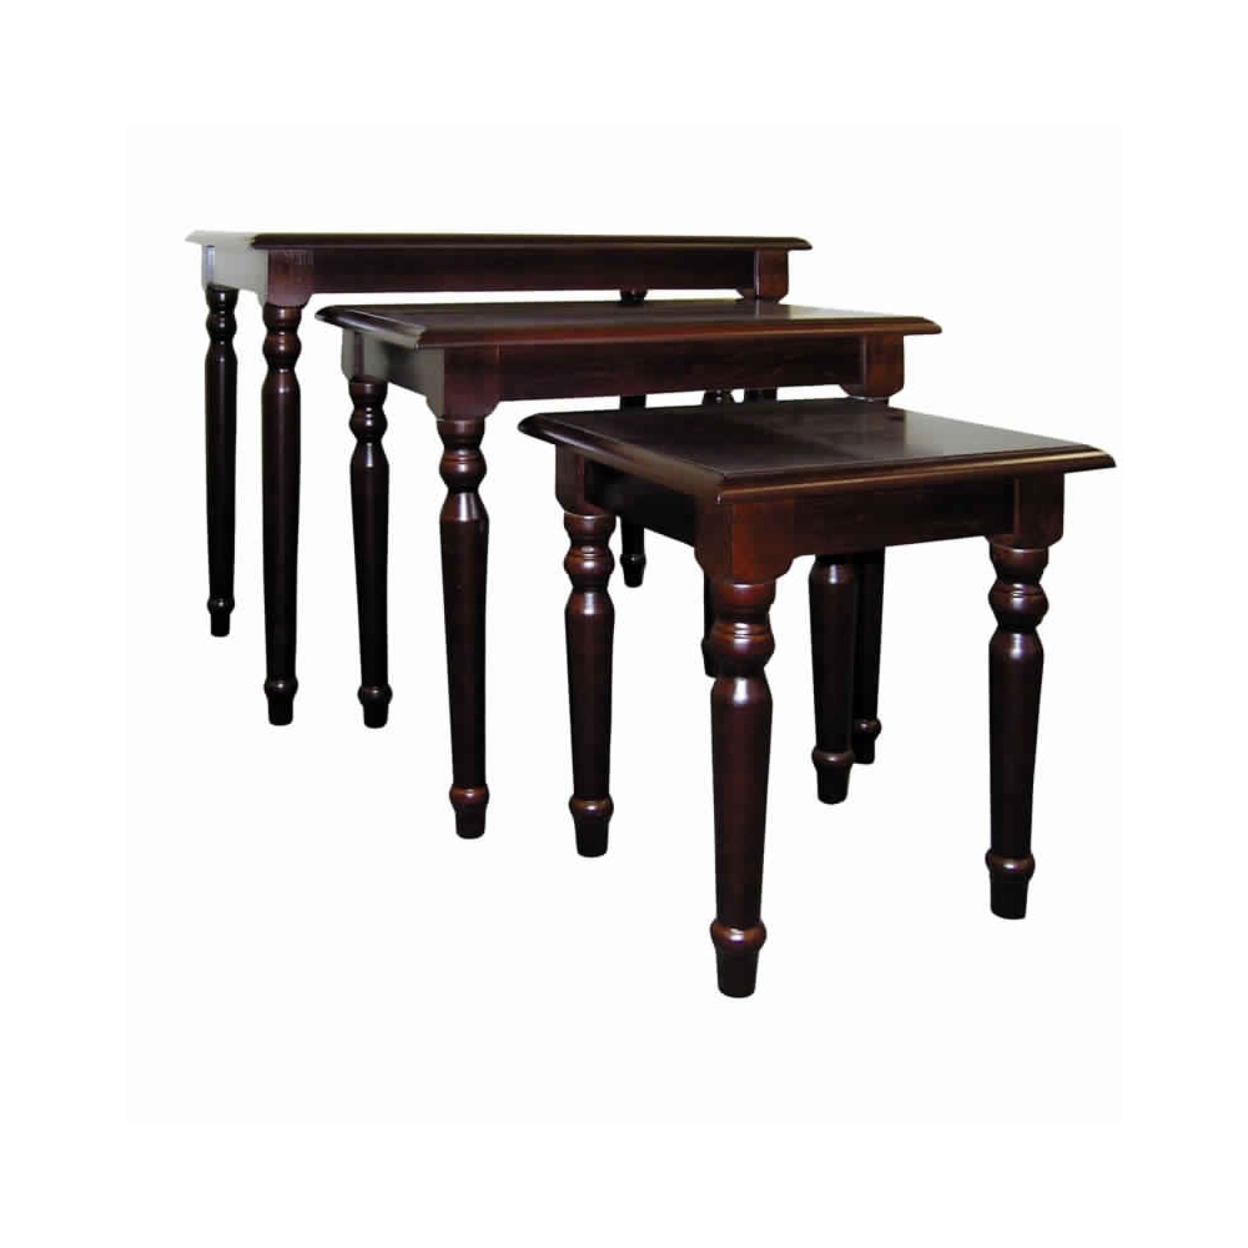 3 Piece Wooden Nesting Tables With Turned Tapered Legs, Cherry Brown- Saltoro Sherpi